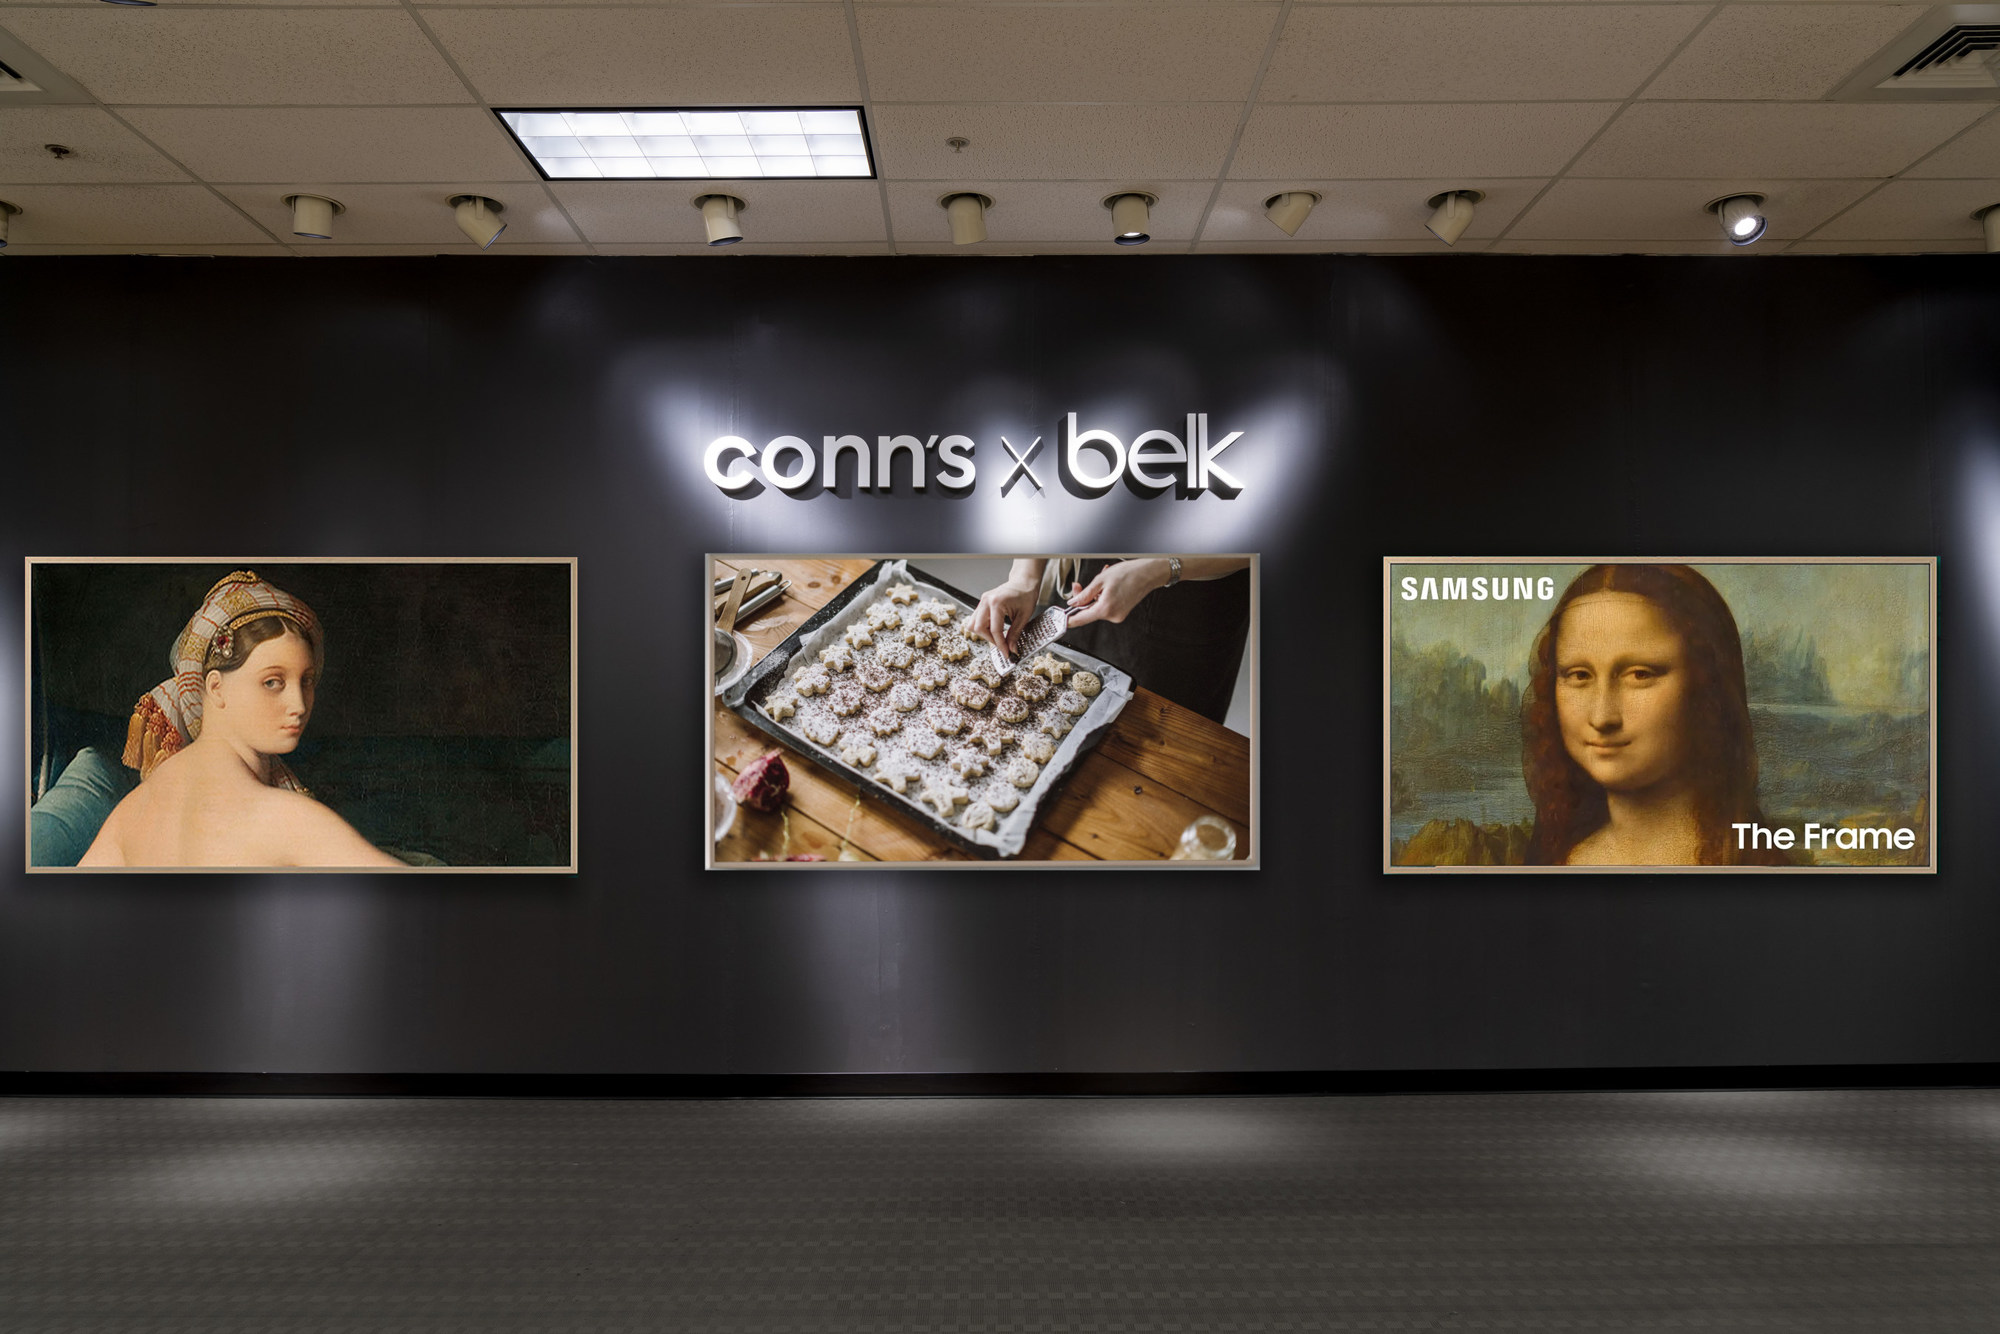 Belk Inc. and Conn’s HomePlus are launching the “Conn’s x Belk” store-within-a-store concept in which Conn’s will open in Belk stores.